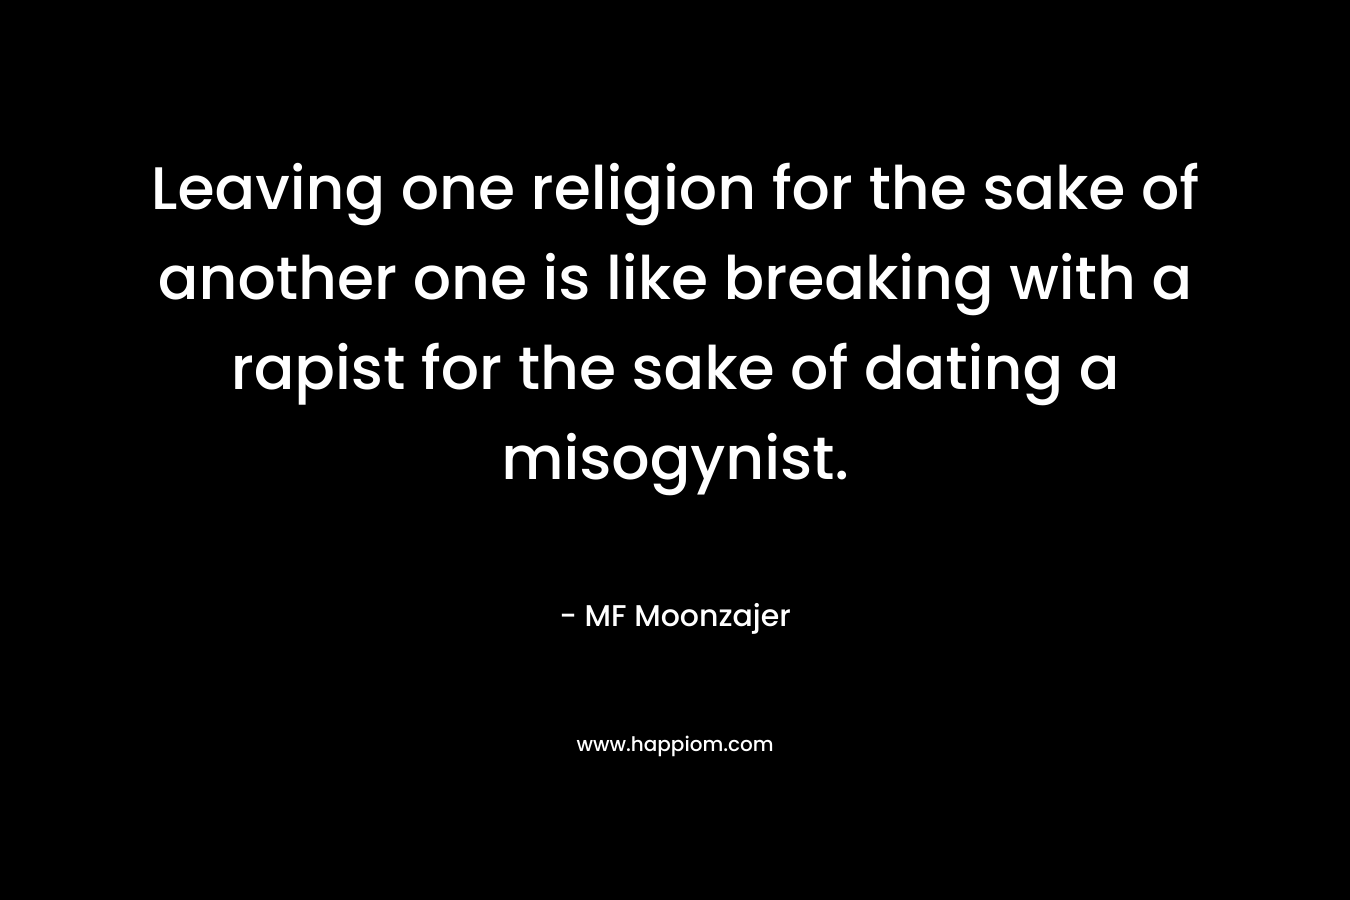 Leaving one religion for the sake of another one is like breaking with a rapist for the sake of dating a misogynist.